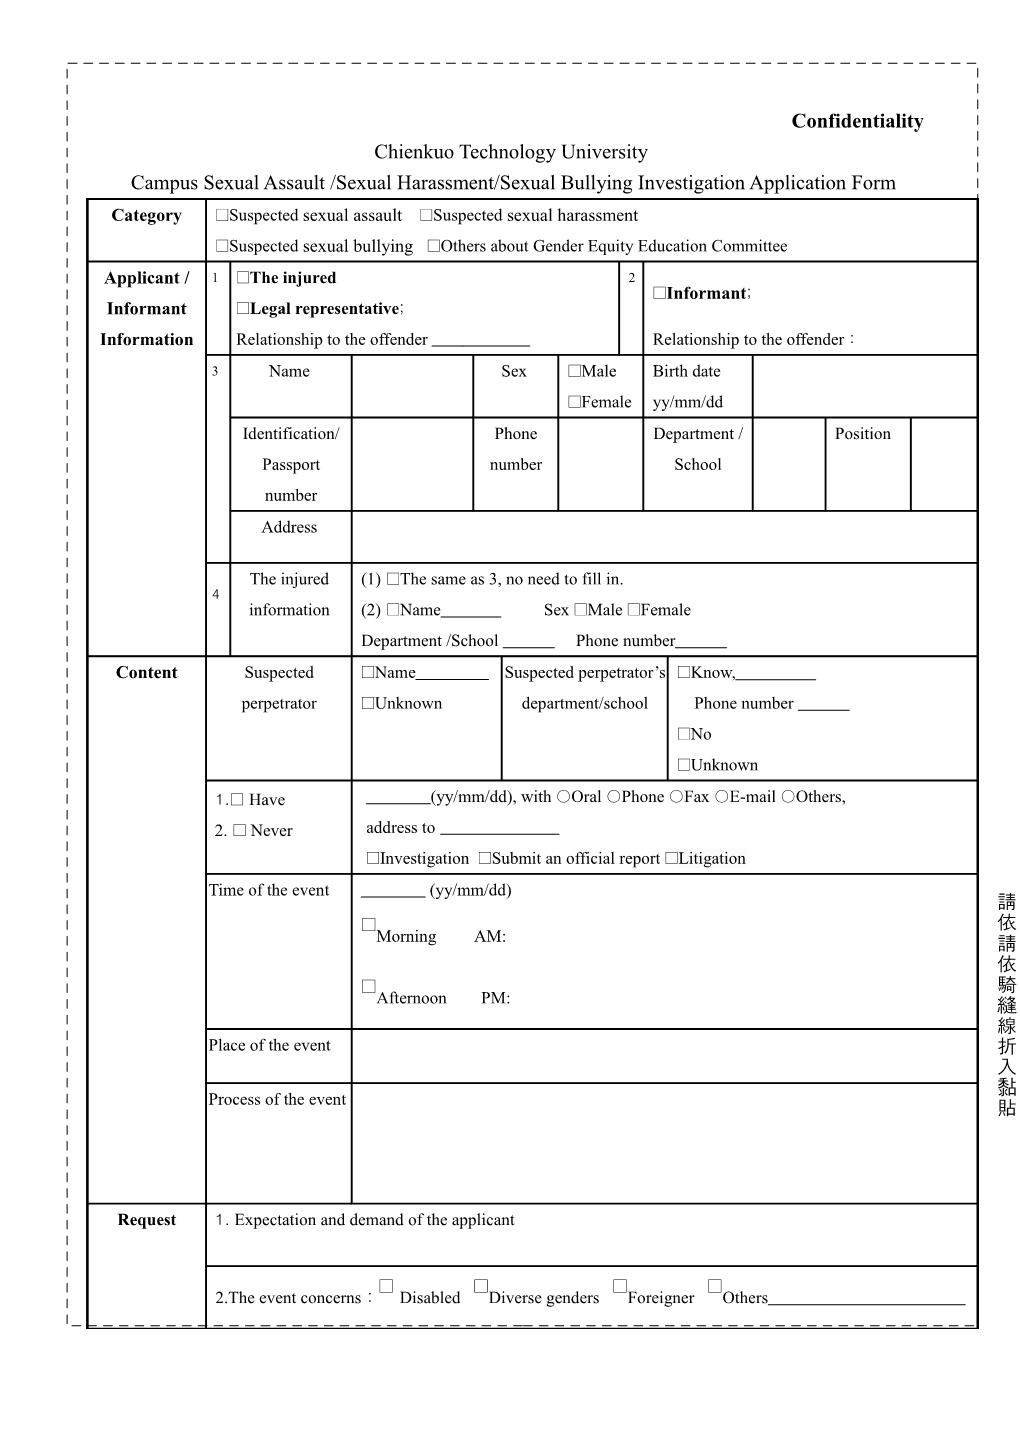 Campus Sexual Assault /Sexual Harassment/Sexual Bullyinginvestigation Application Form